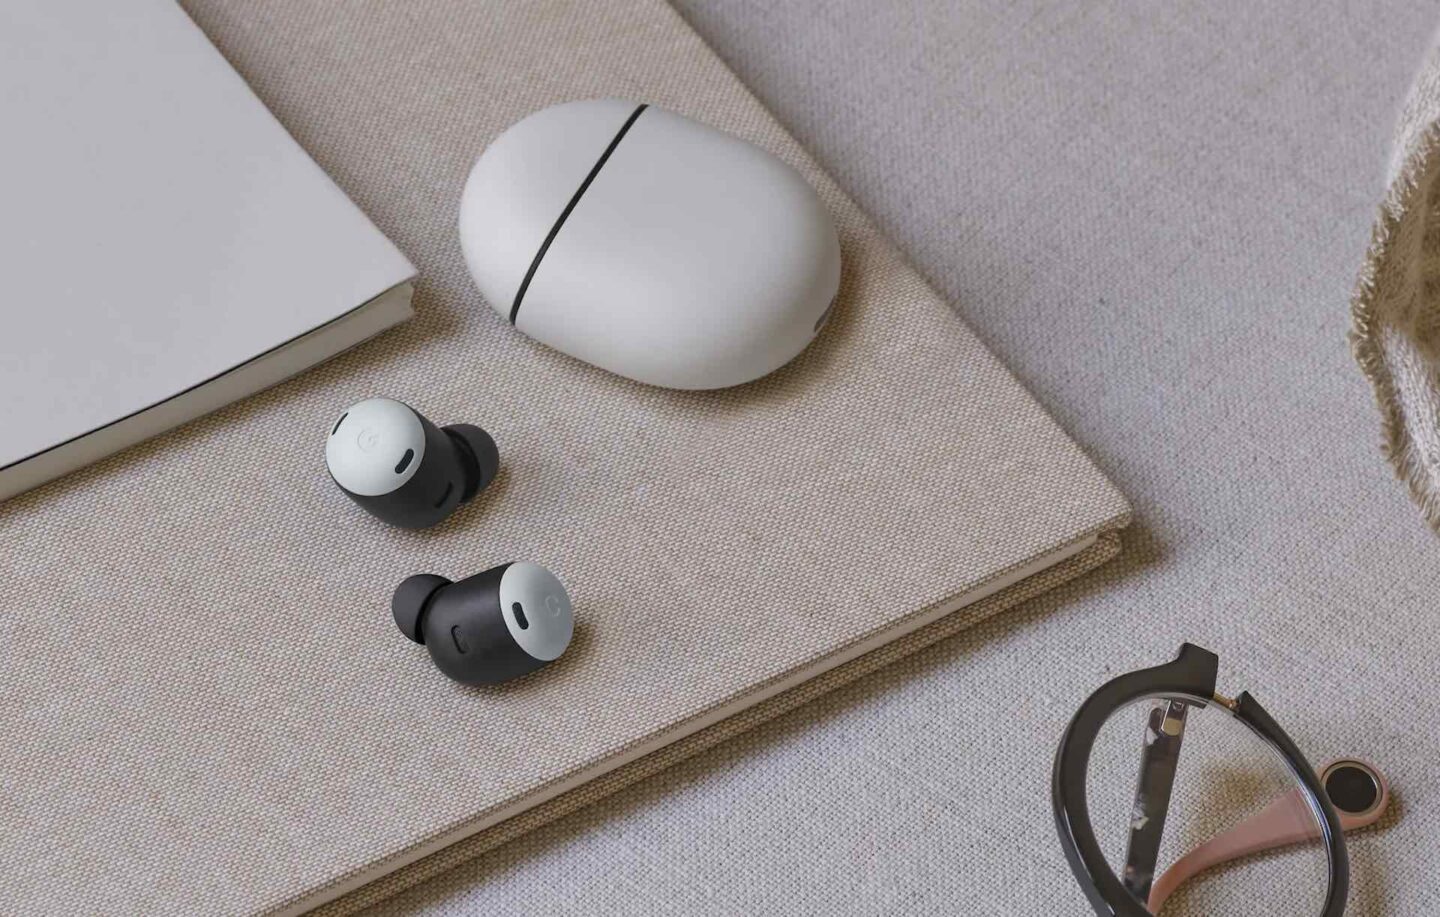 The new Google Pixel Buds Pro cost $199, have a custom processor and can suppress ambient noise